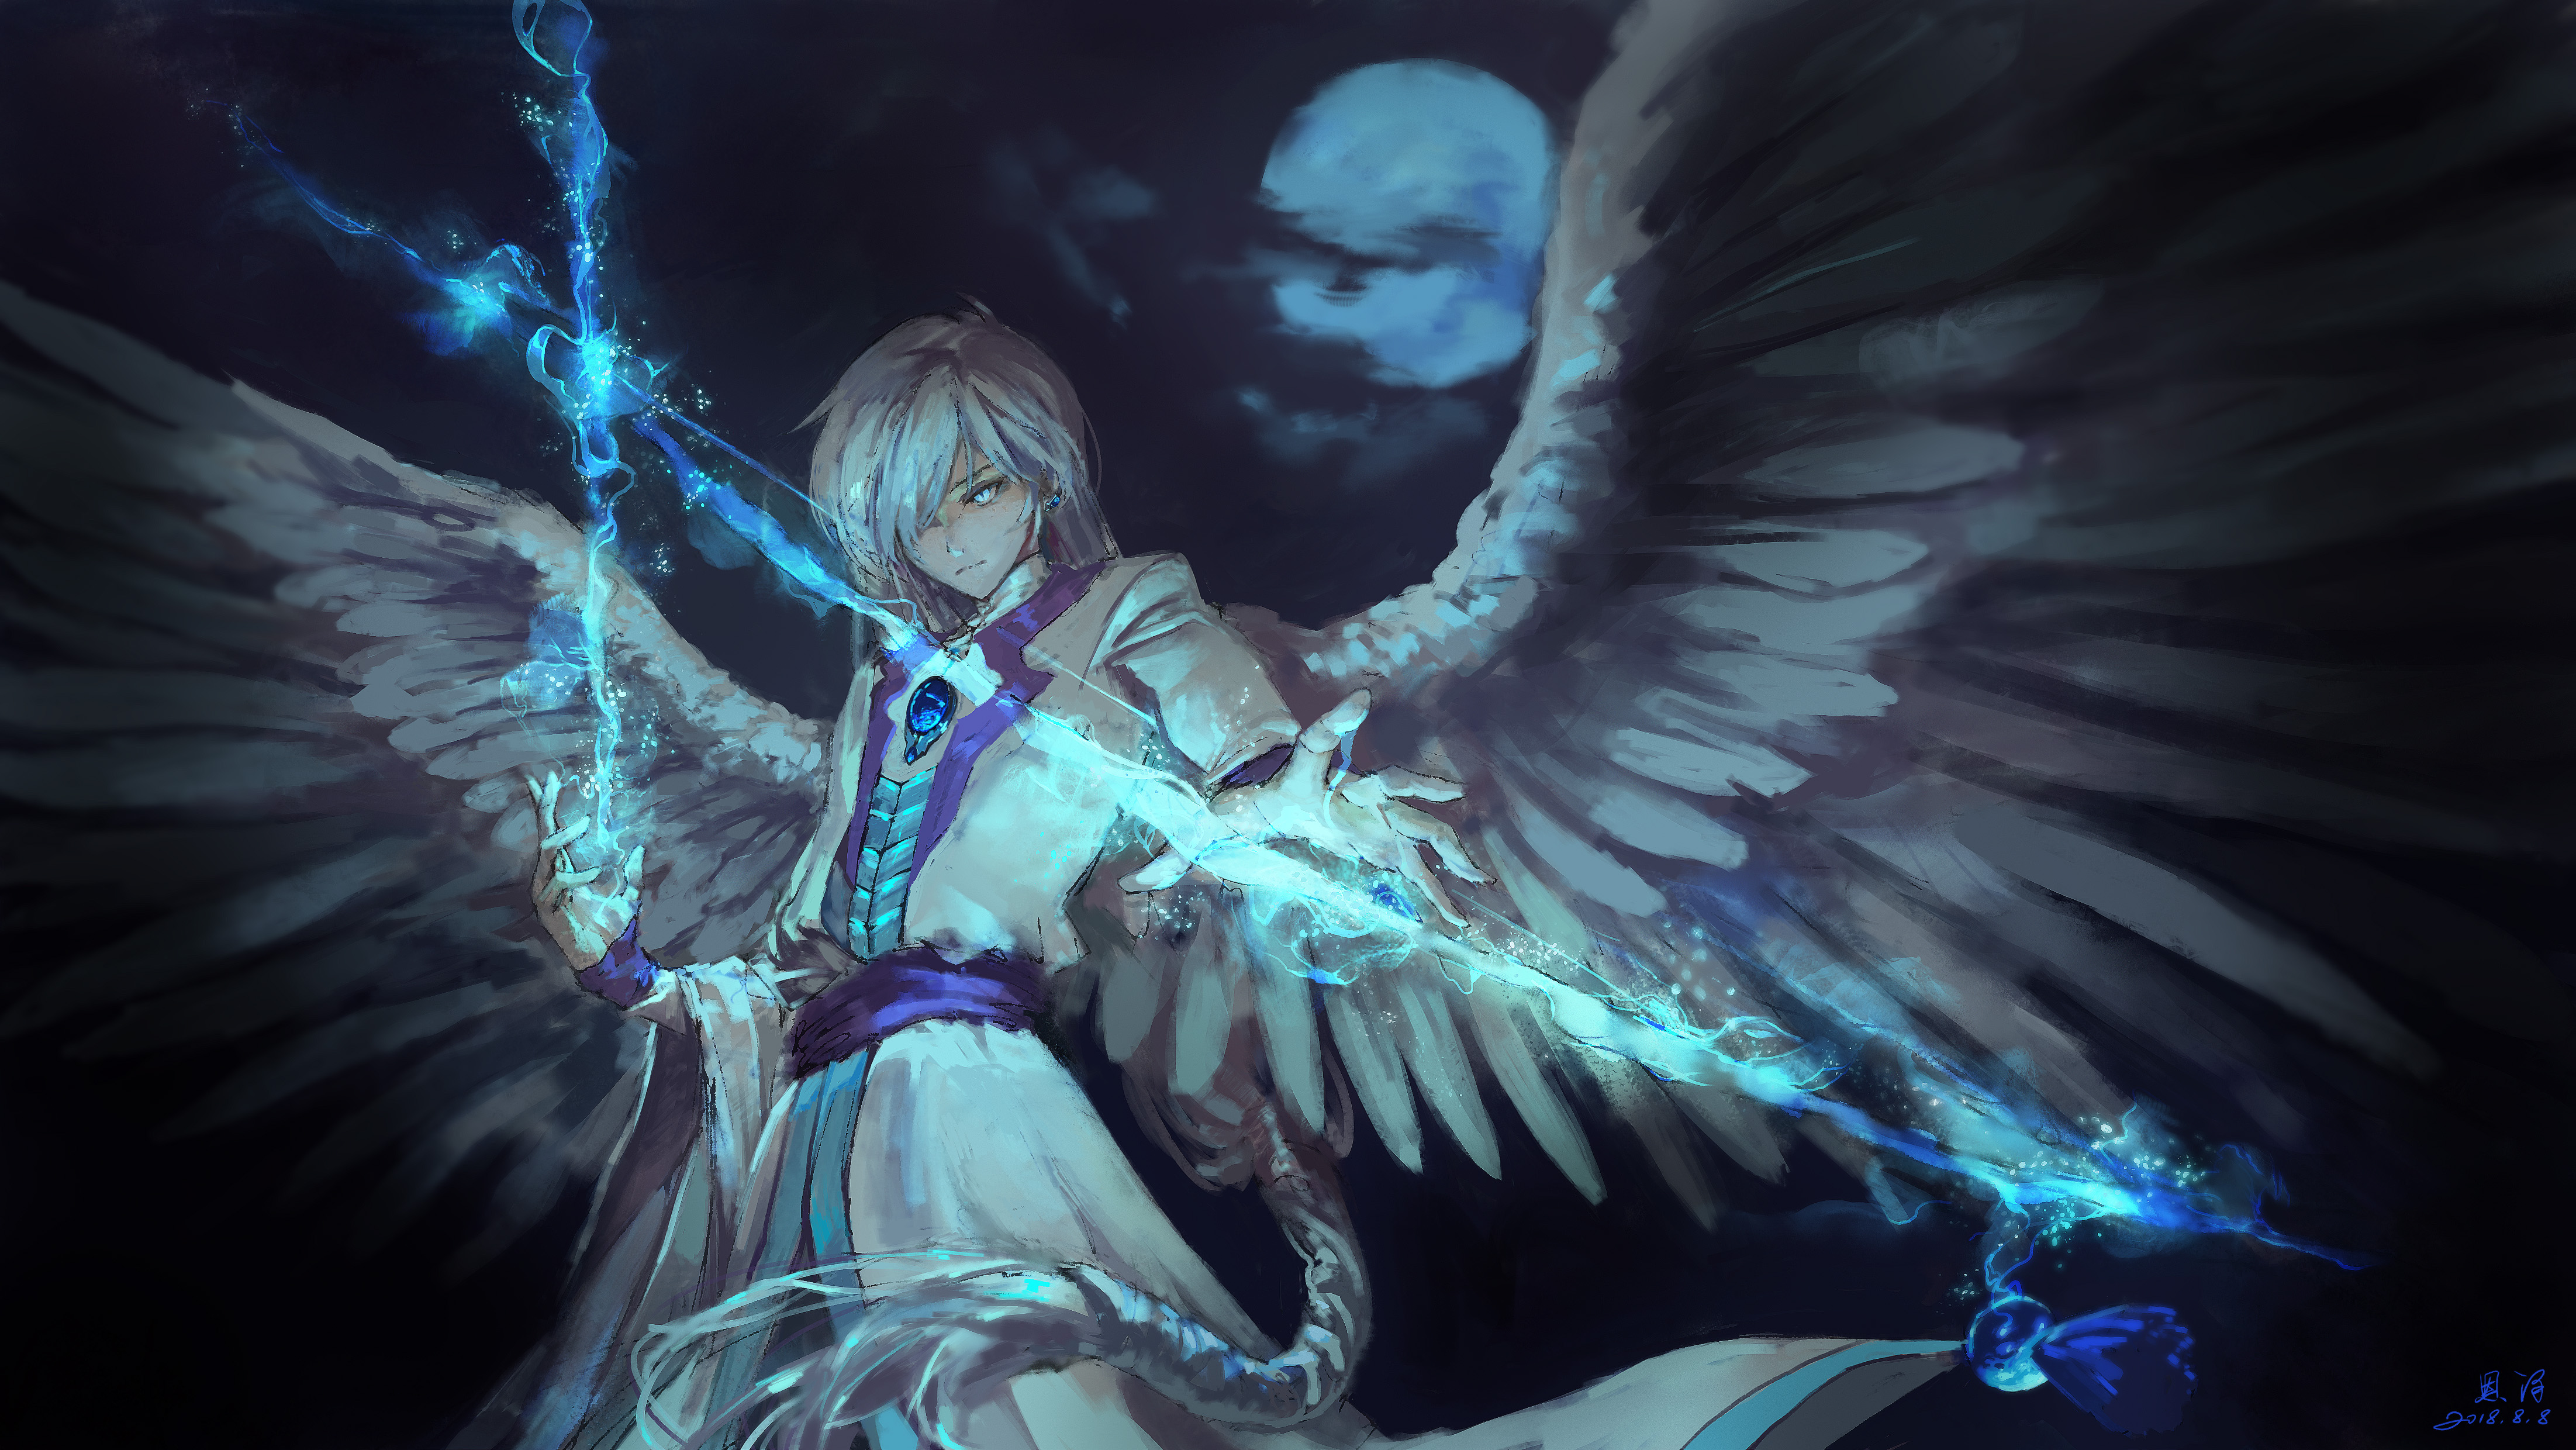 Anime Angel Boy With Magical Arrow, HD Anime, 4k Wallpapers, Images